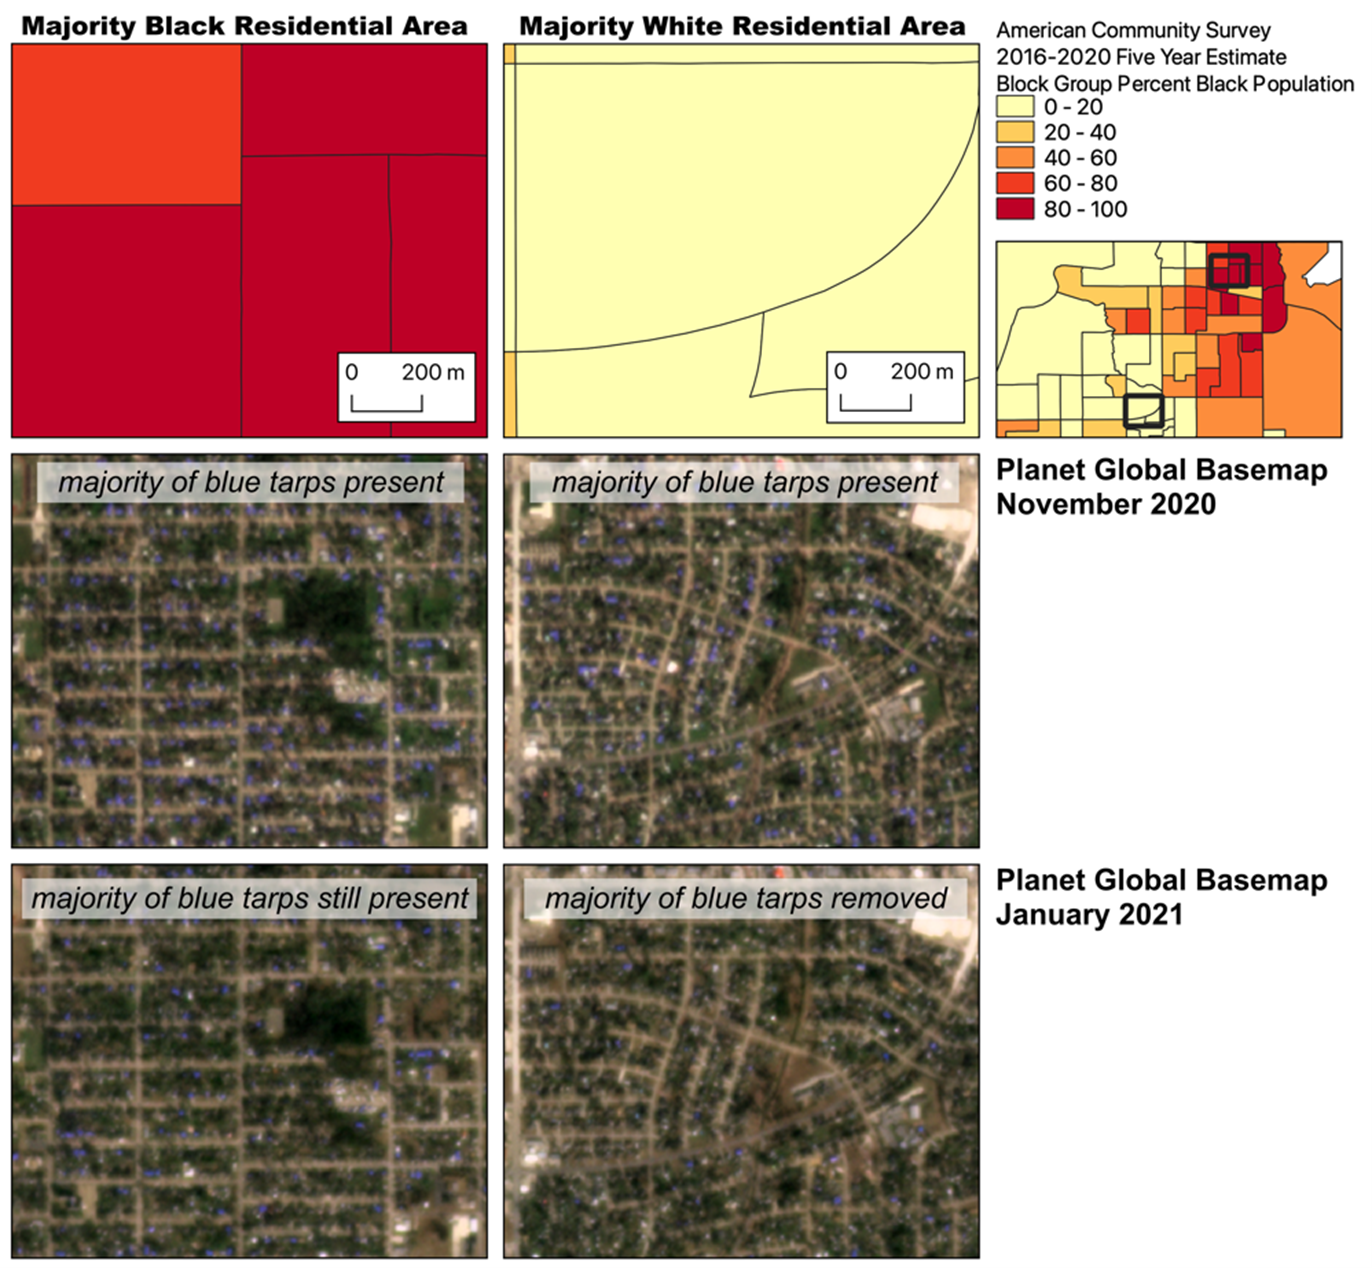 PlanetScope imagery shows that tarps remain on longer for majority Black residential areas compared to majority white residential areas.